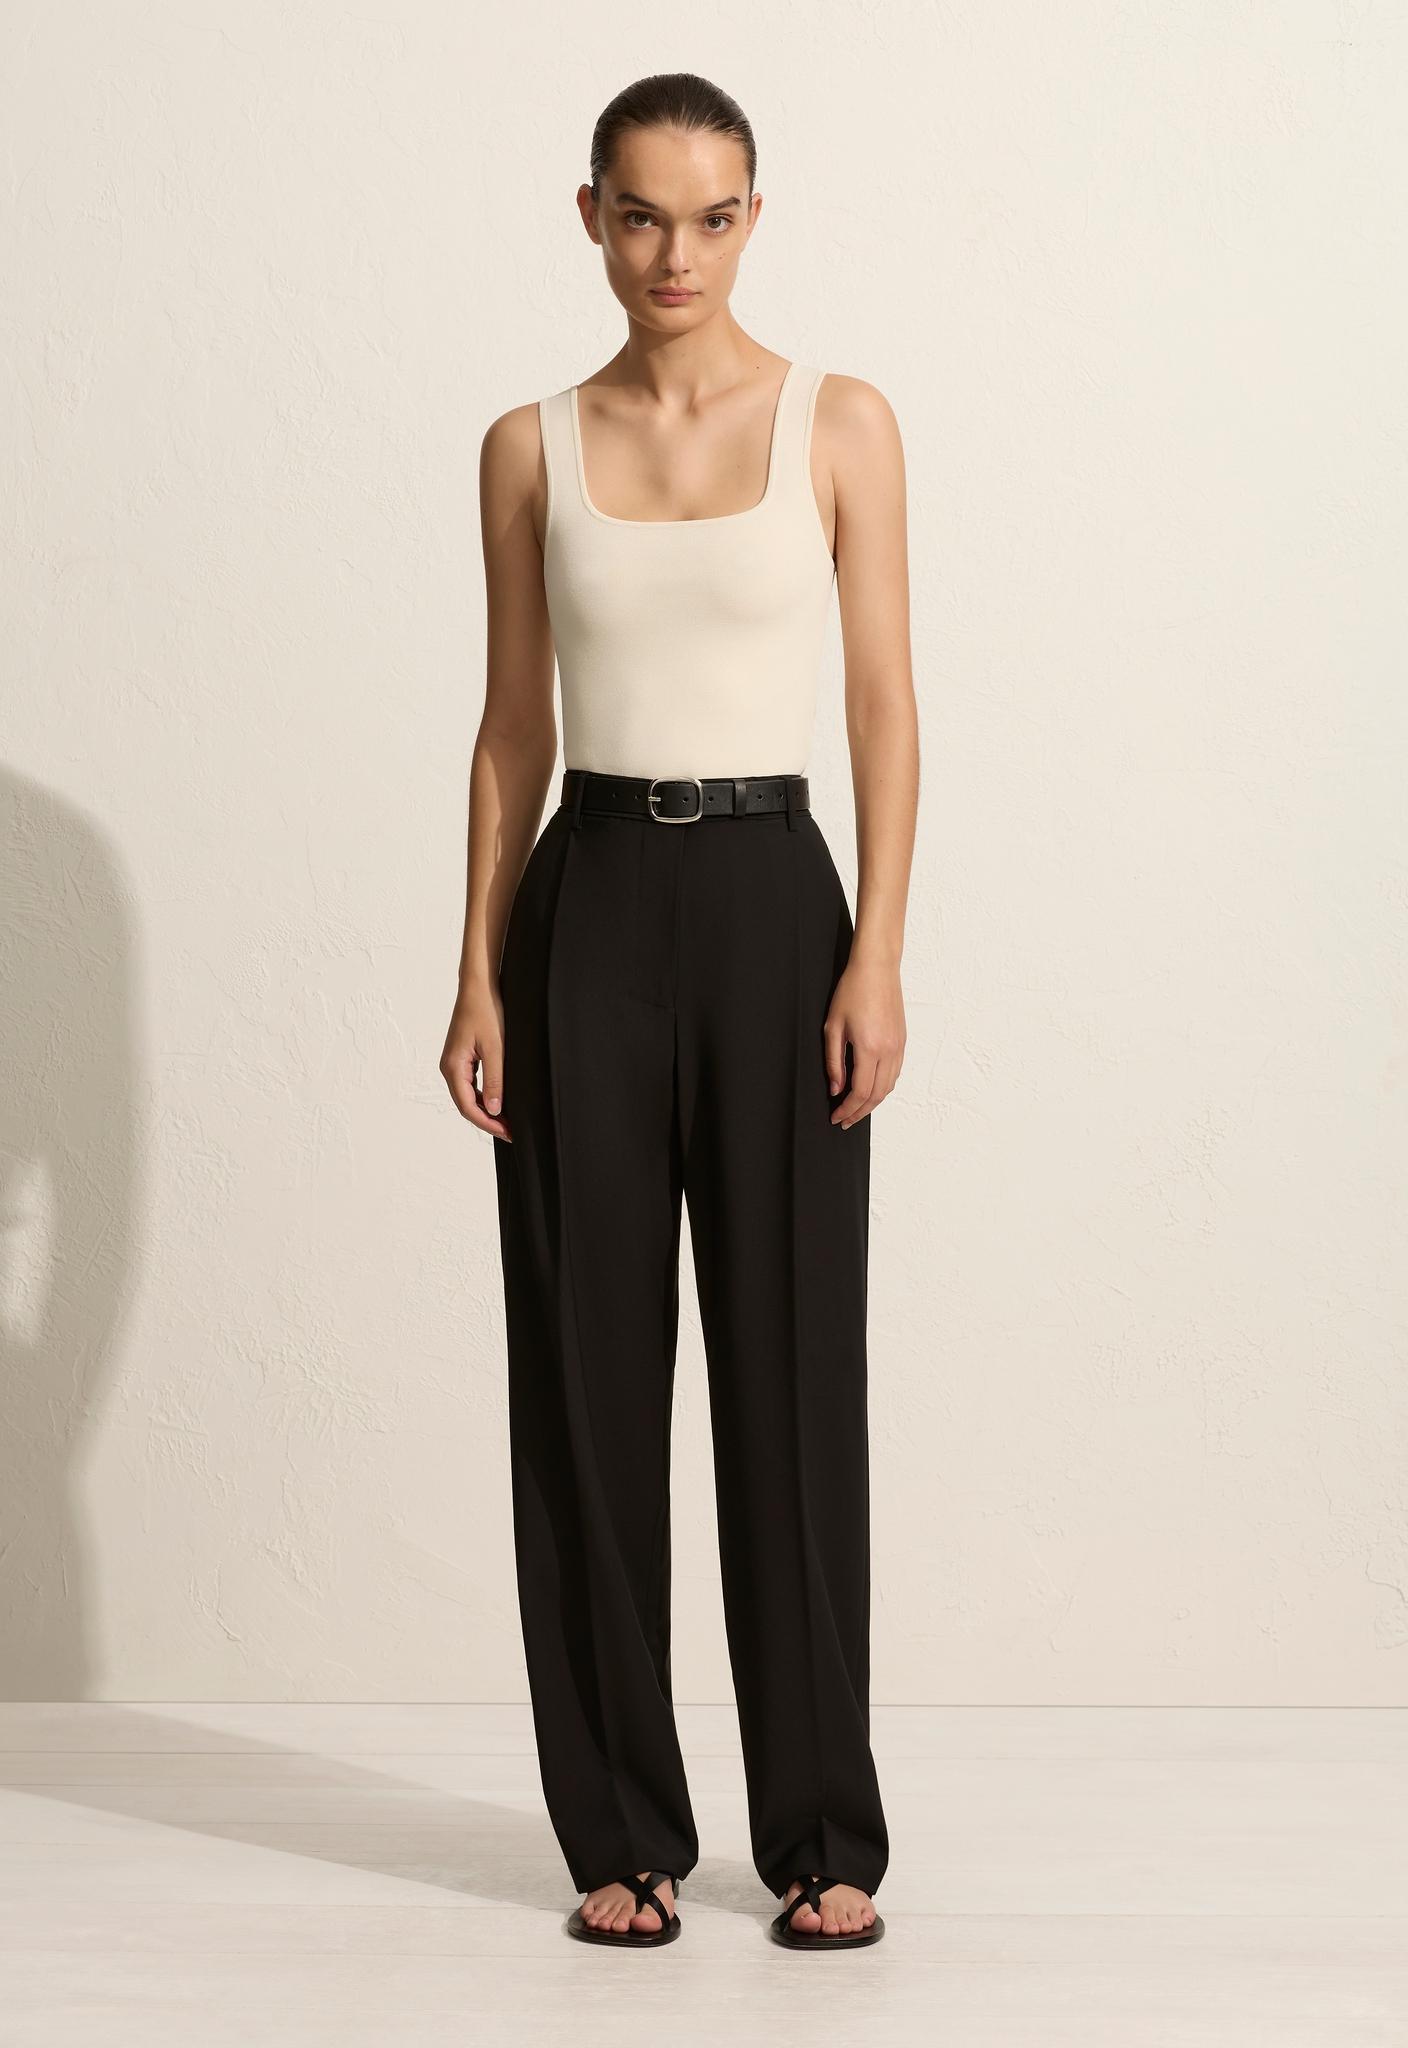 Relaxed Tailored Pleat Trouser - Black - Matteau